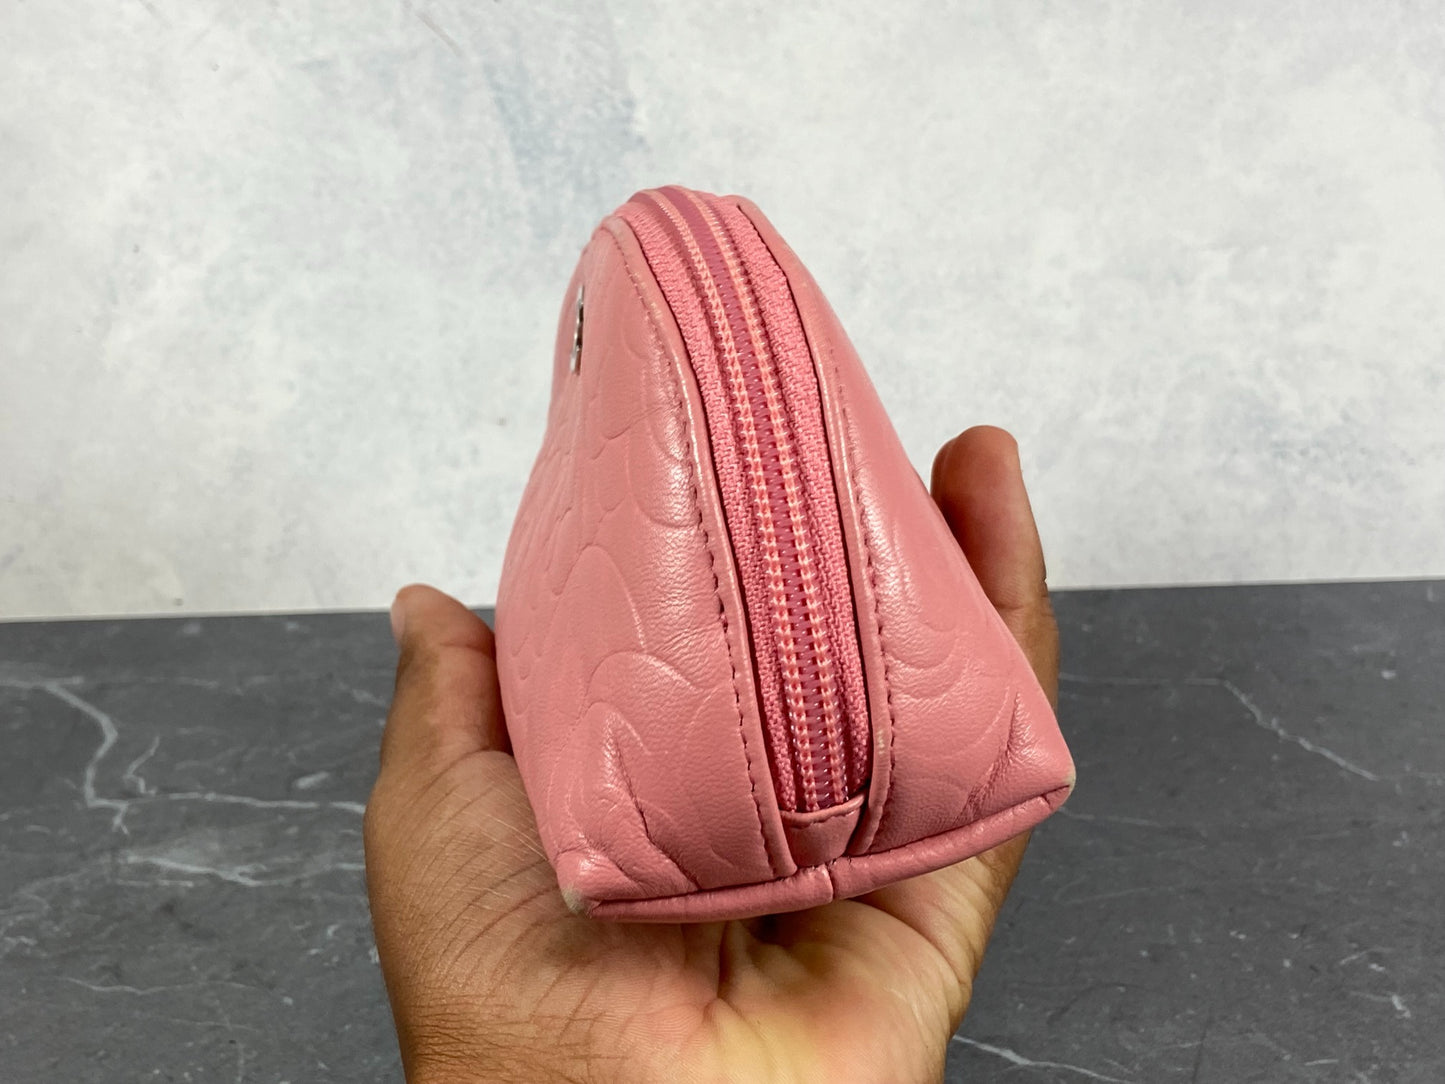 Chanel Camélia Cosmetic Pouch Pink